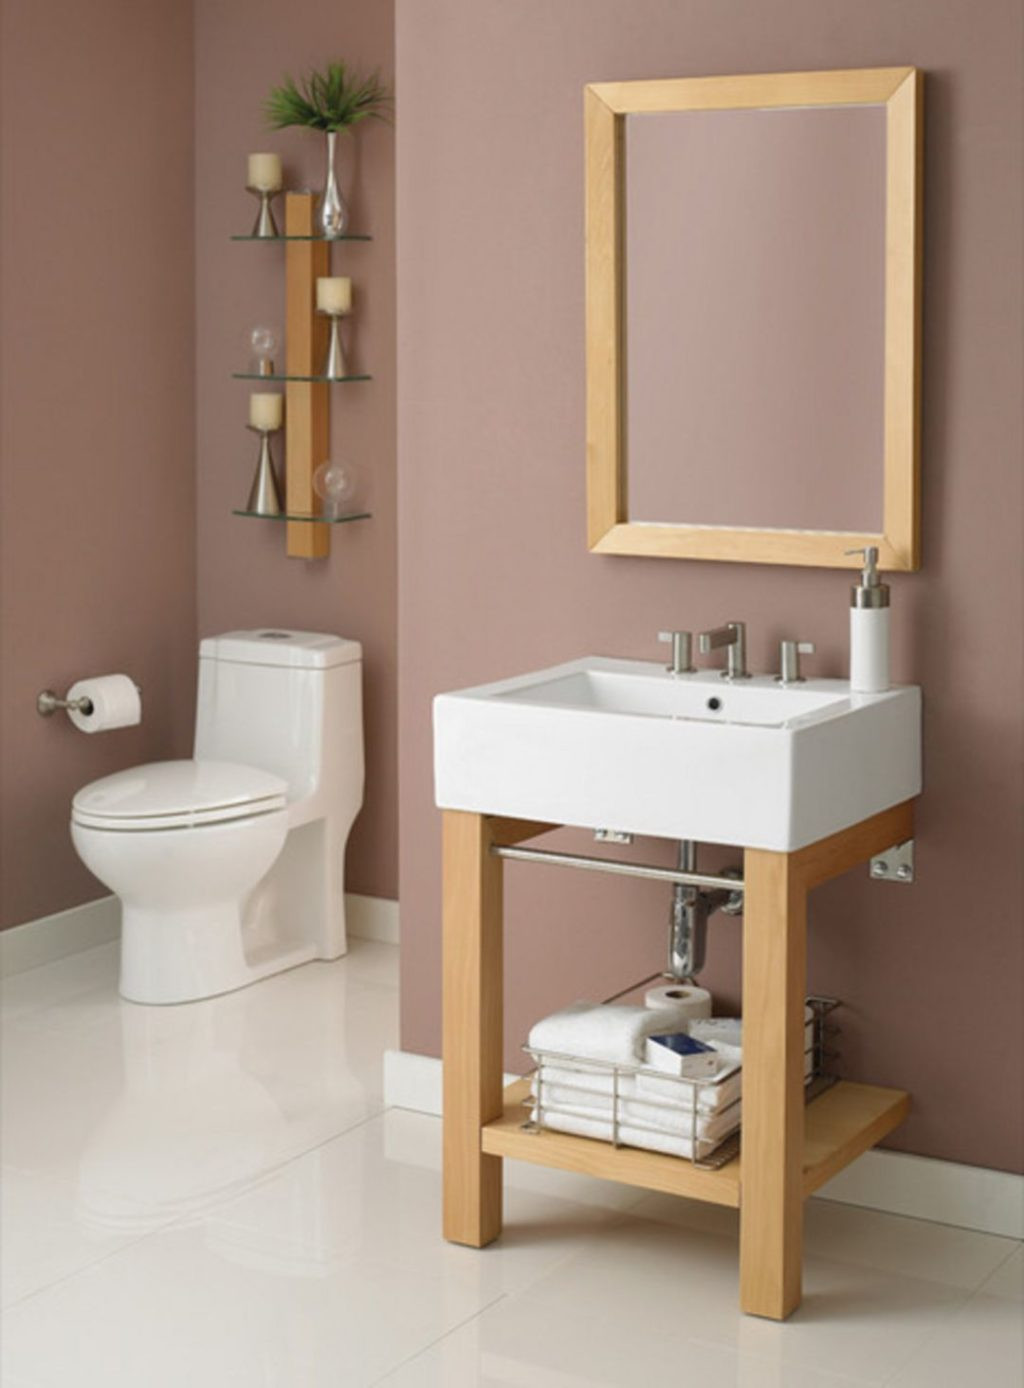 Double Vanity For Small Bathroom
 15 Best Vanities Ideas for Your Small Bathroom Awesome